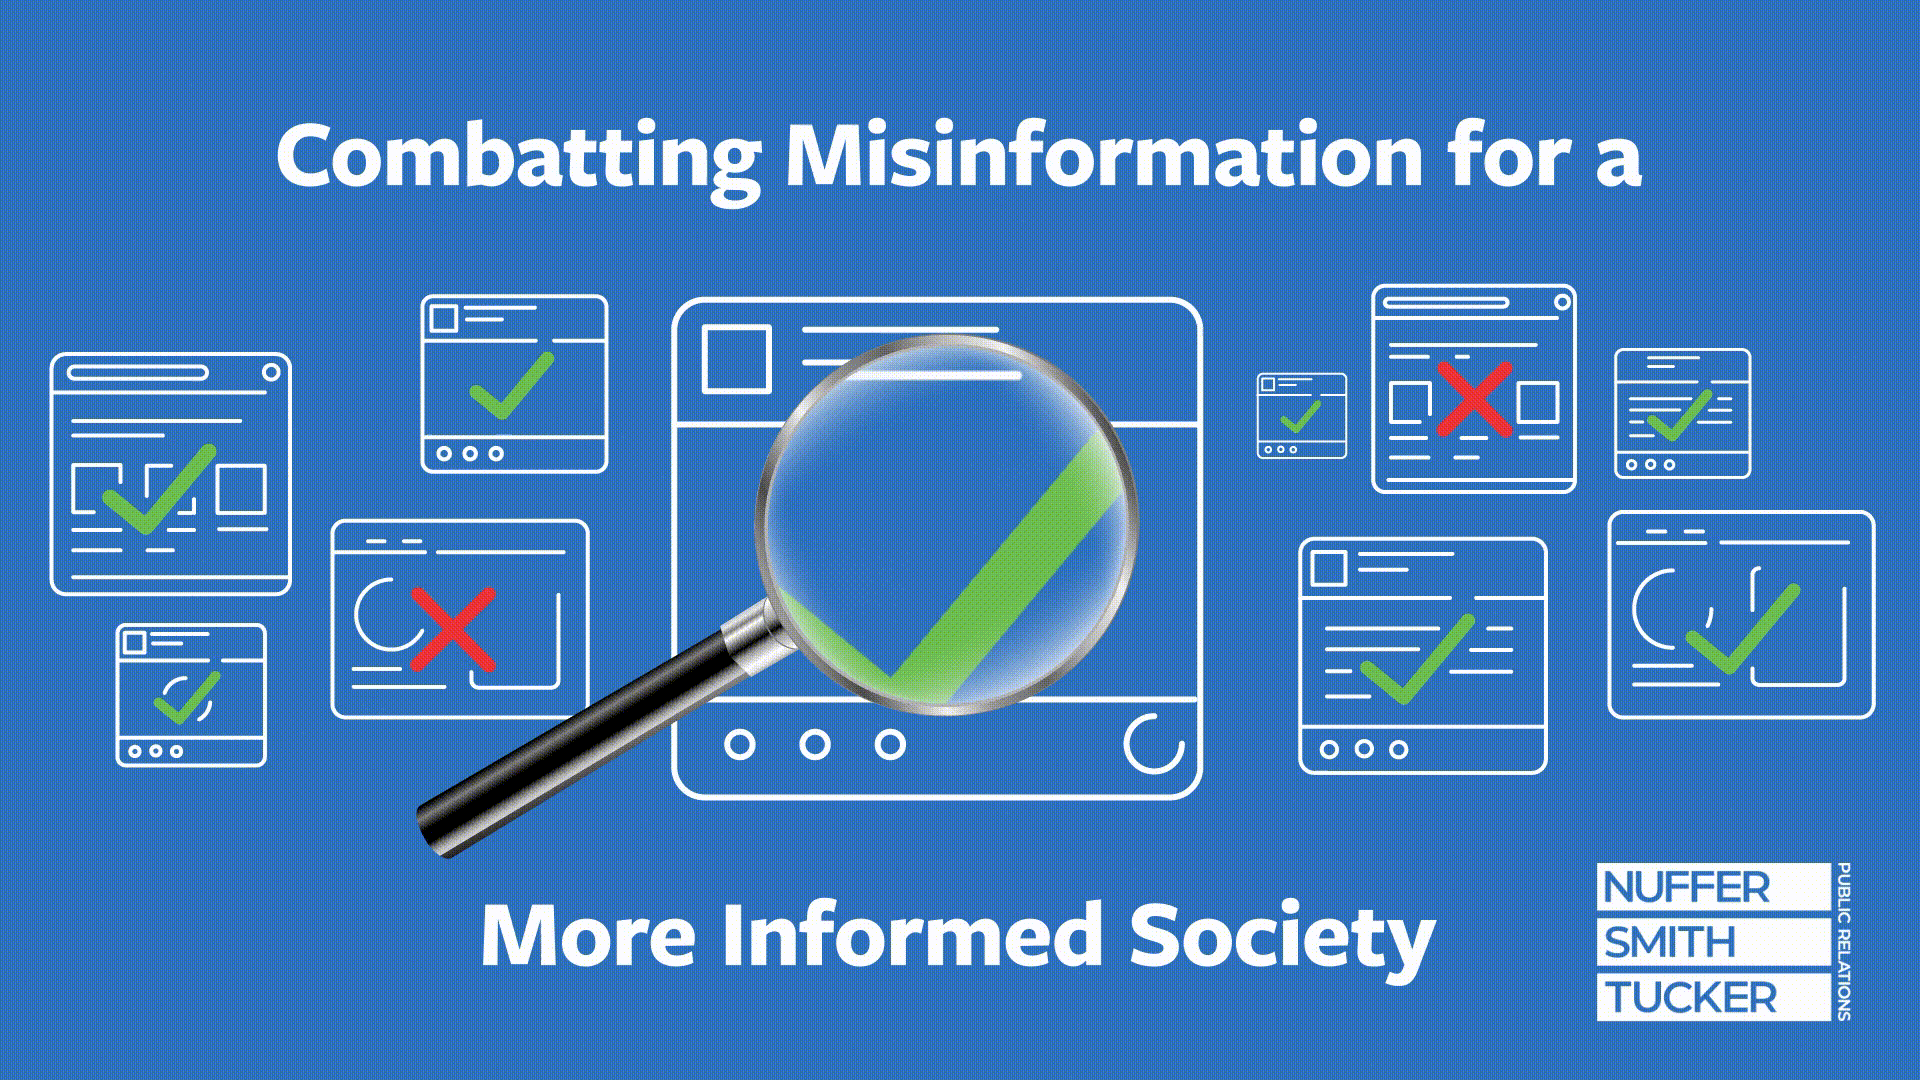 Combatting Misinformation for a More Informed Society